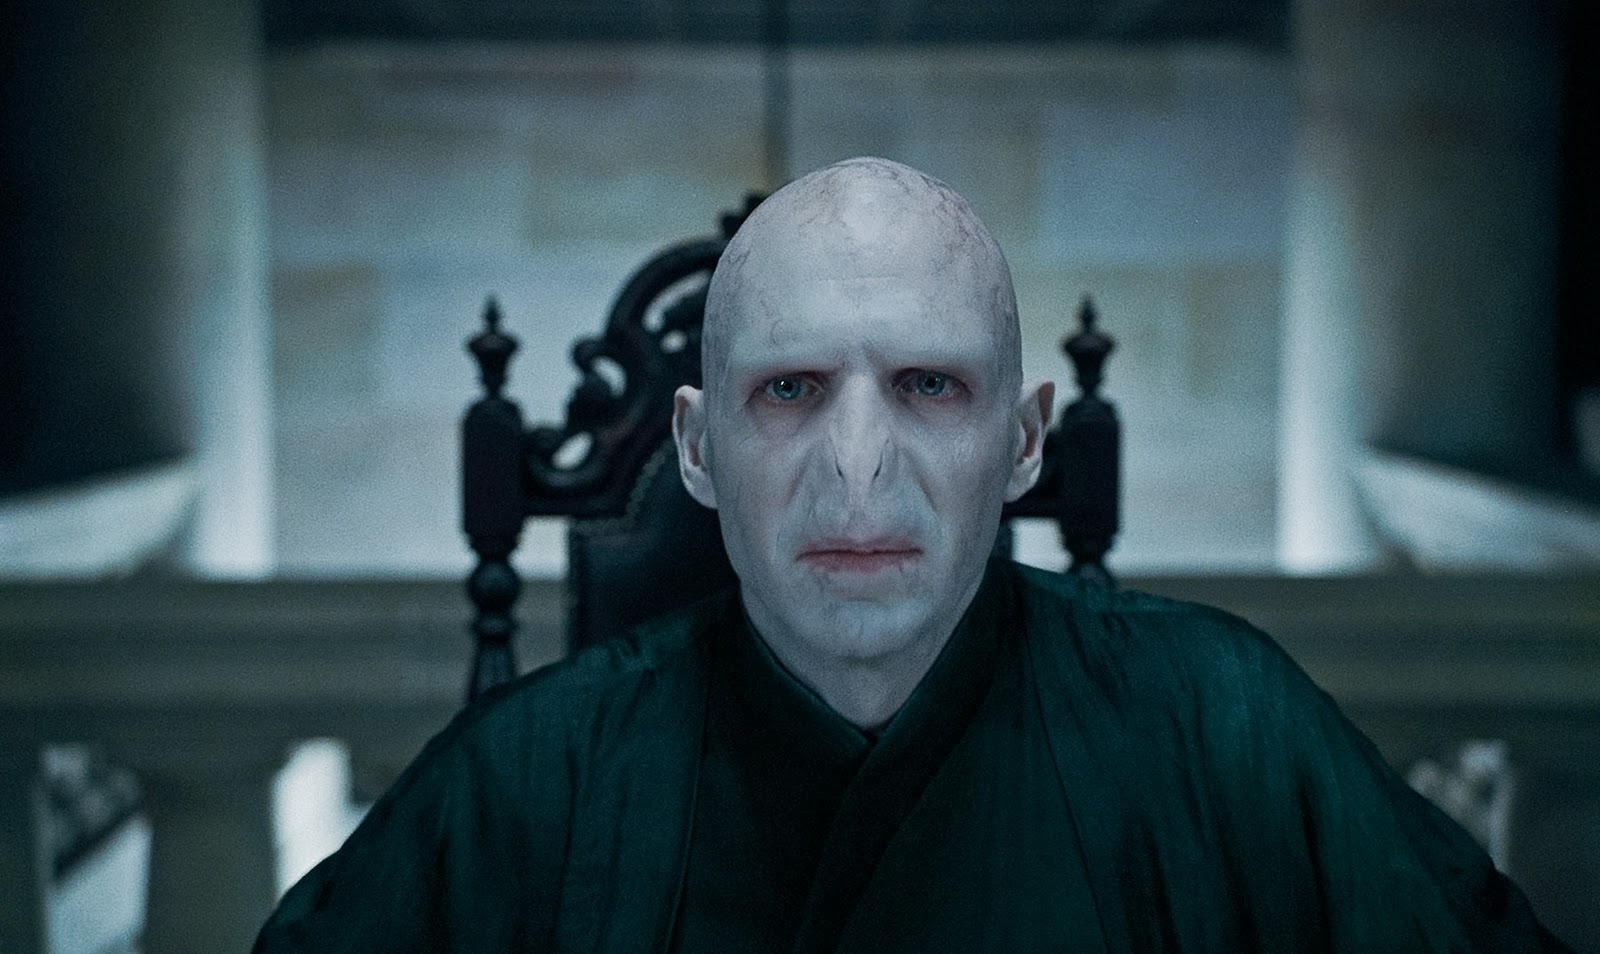 Thefaceblog: voldemort: where's my nose?